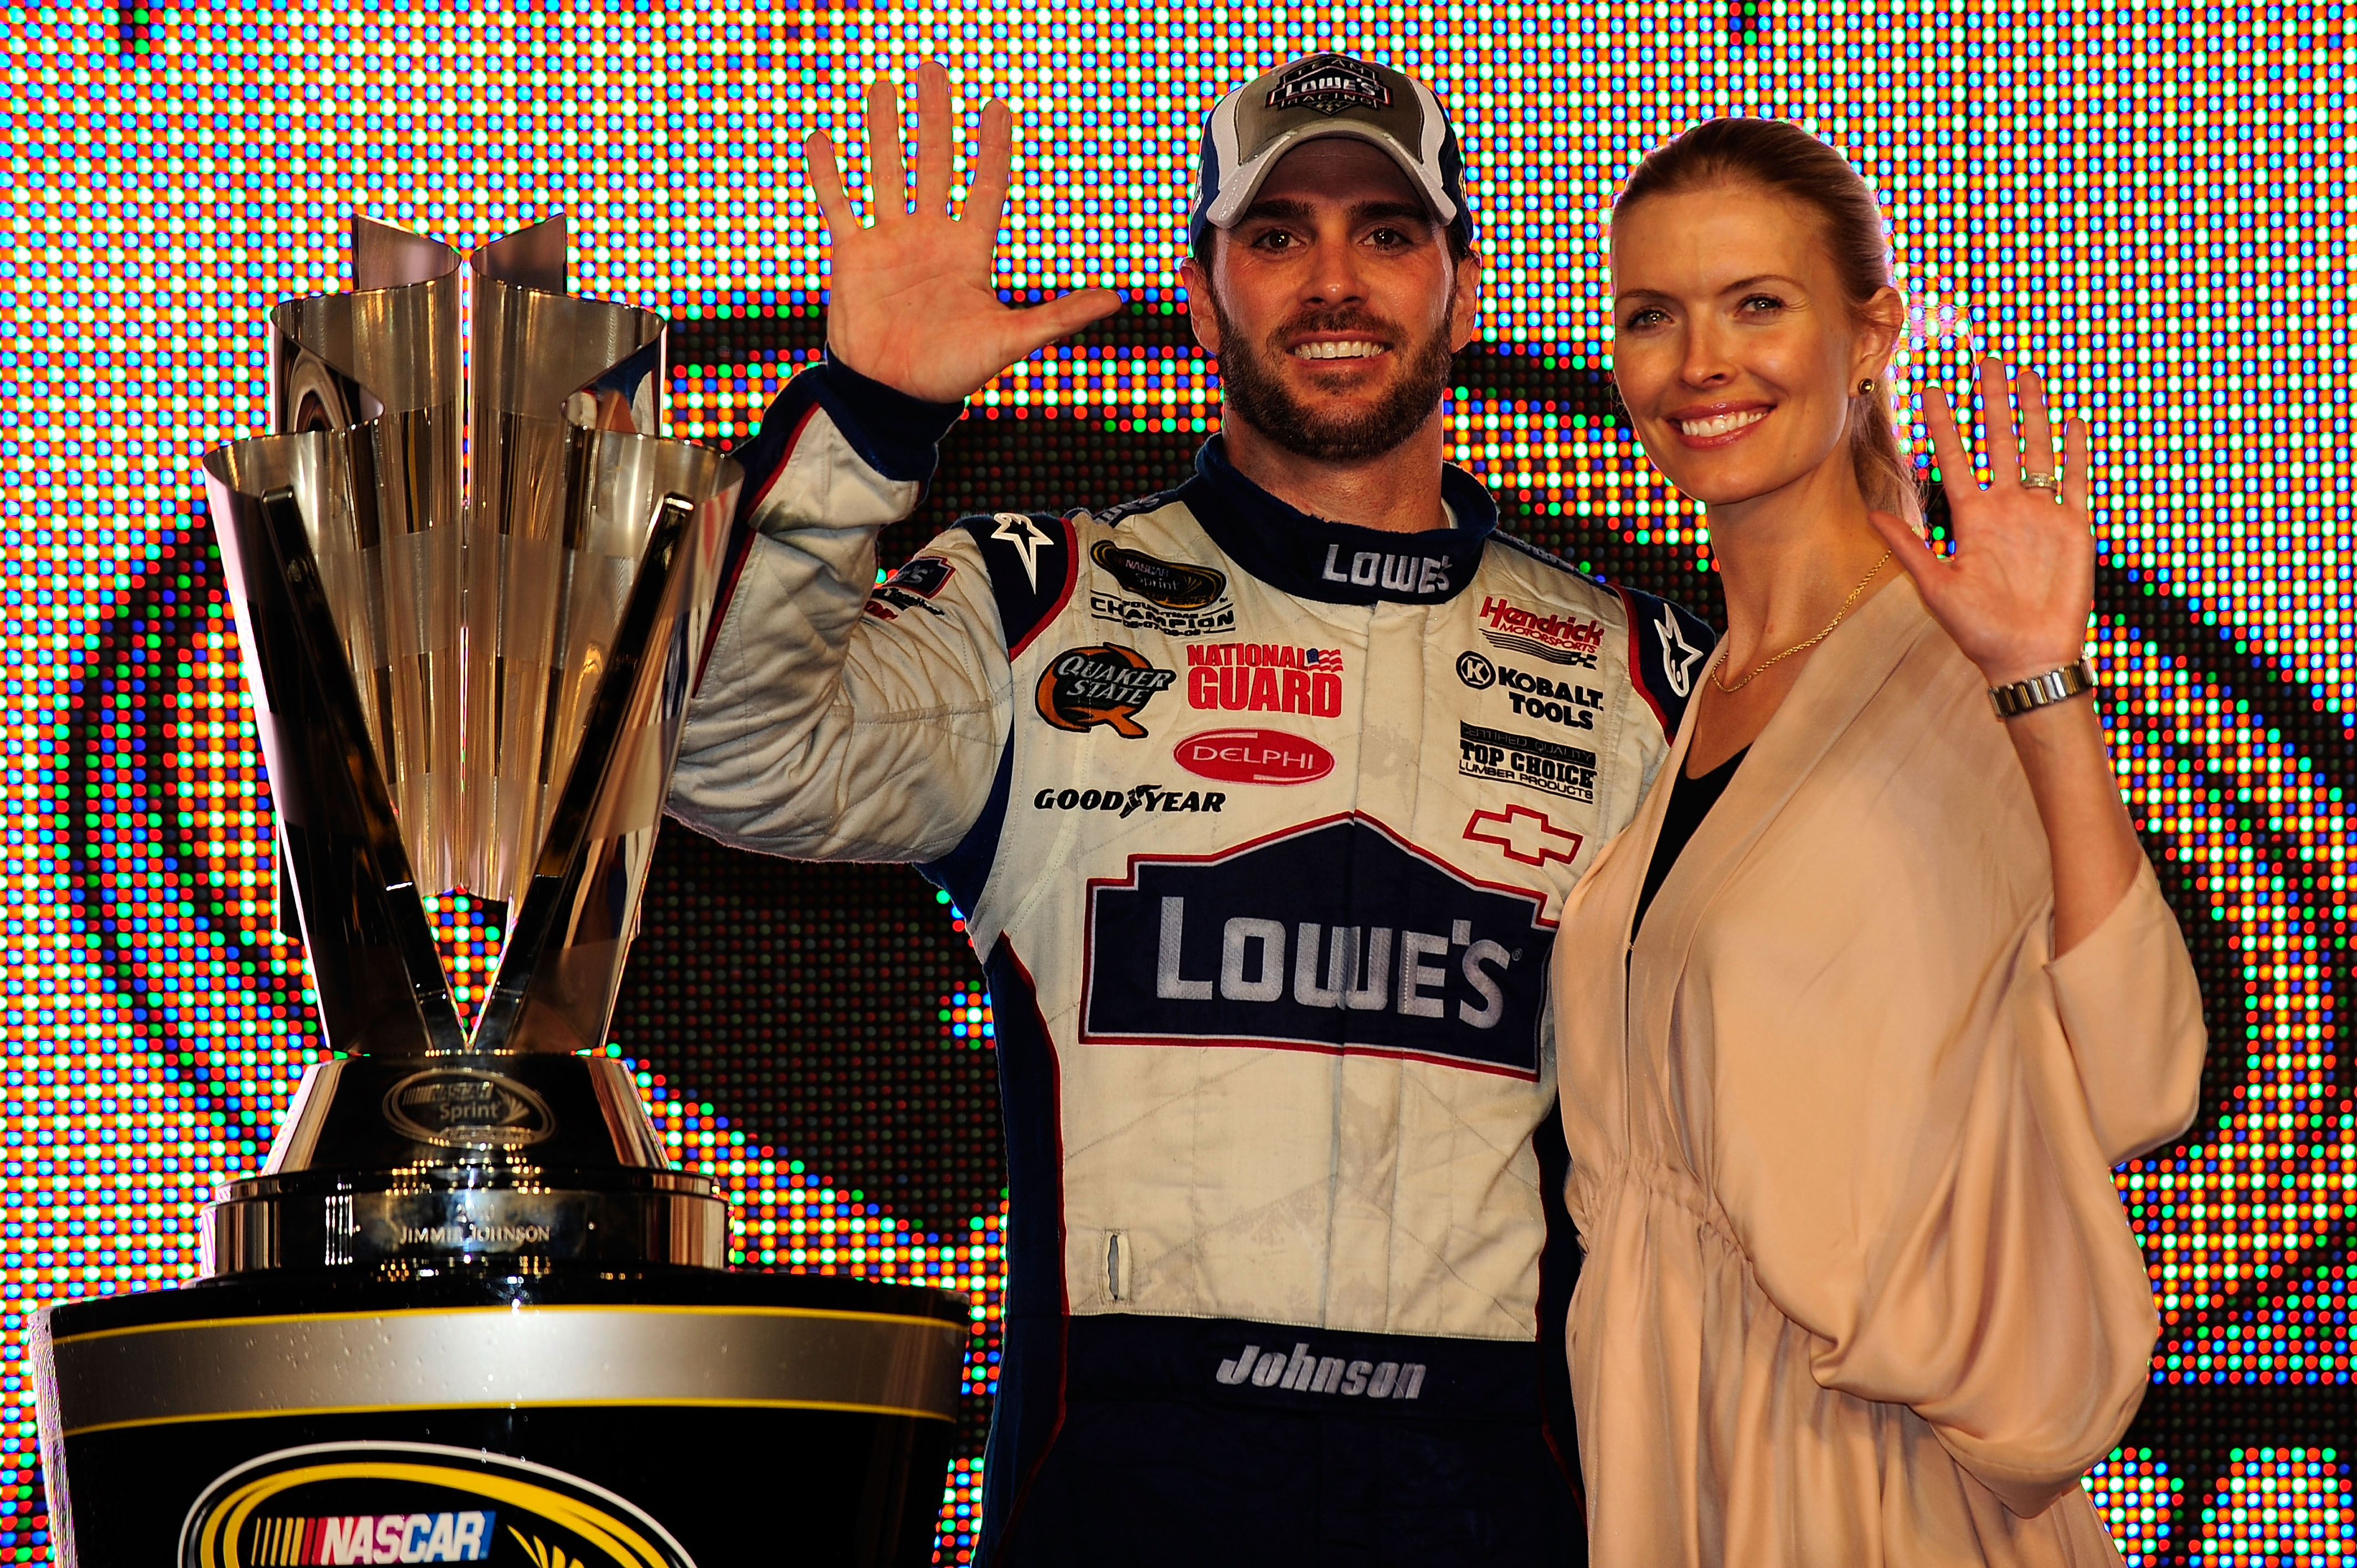 HOMESTEAD, FL - NOVEMBER 21:  Jimmie Johnson (L), driver of the #48 Lowe's Chevrolet, poses with his wife Chandra after finishing in second place in the Ford 400 to clinch his fifth consecutive NASCAR Sprint Cup championship at Homestead-Miami Speedway on